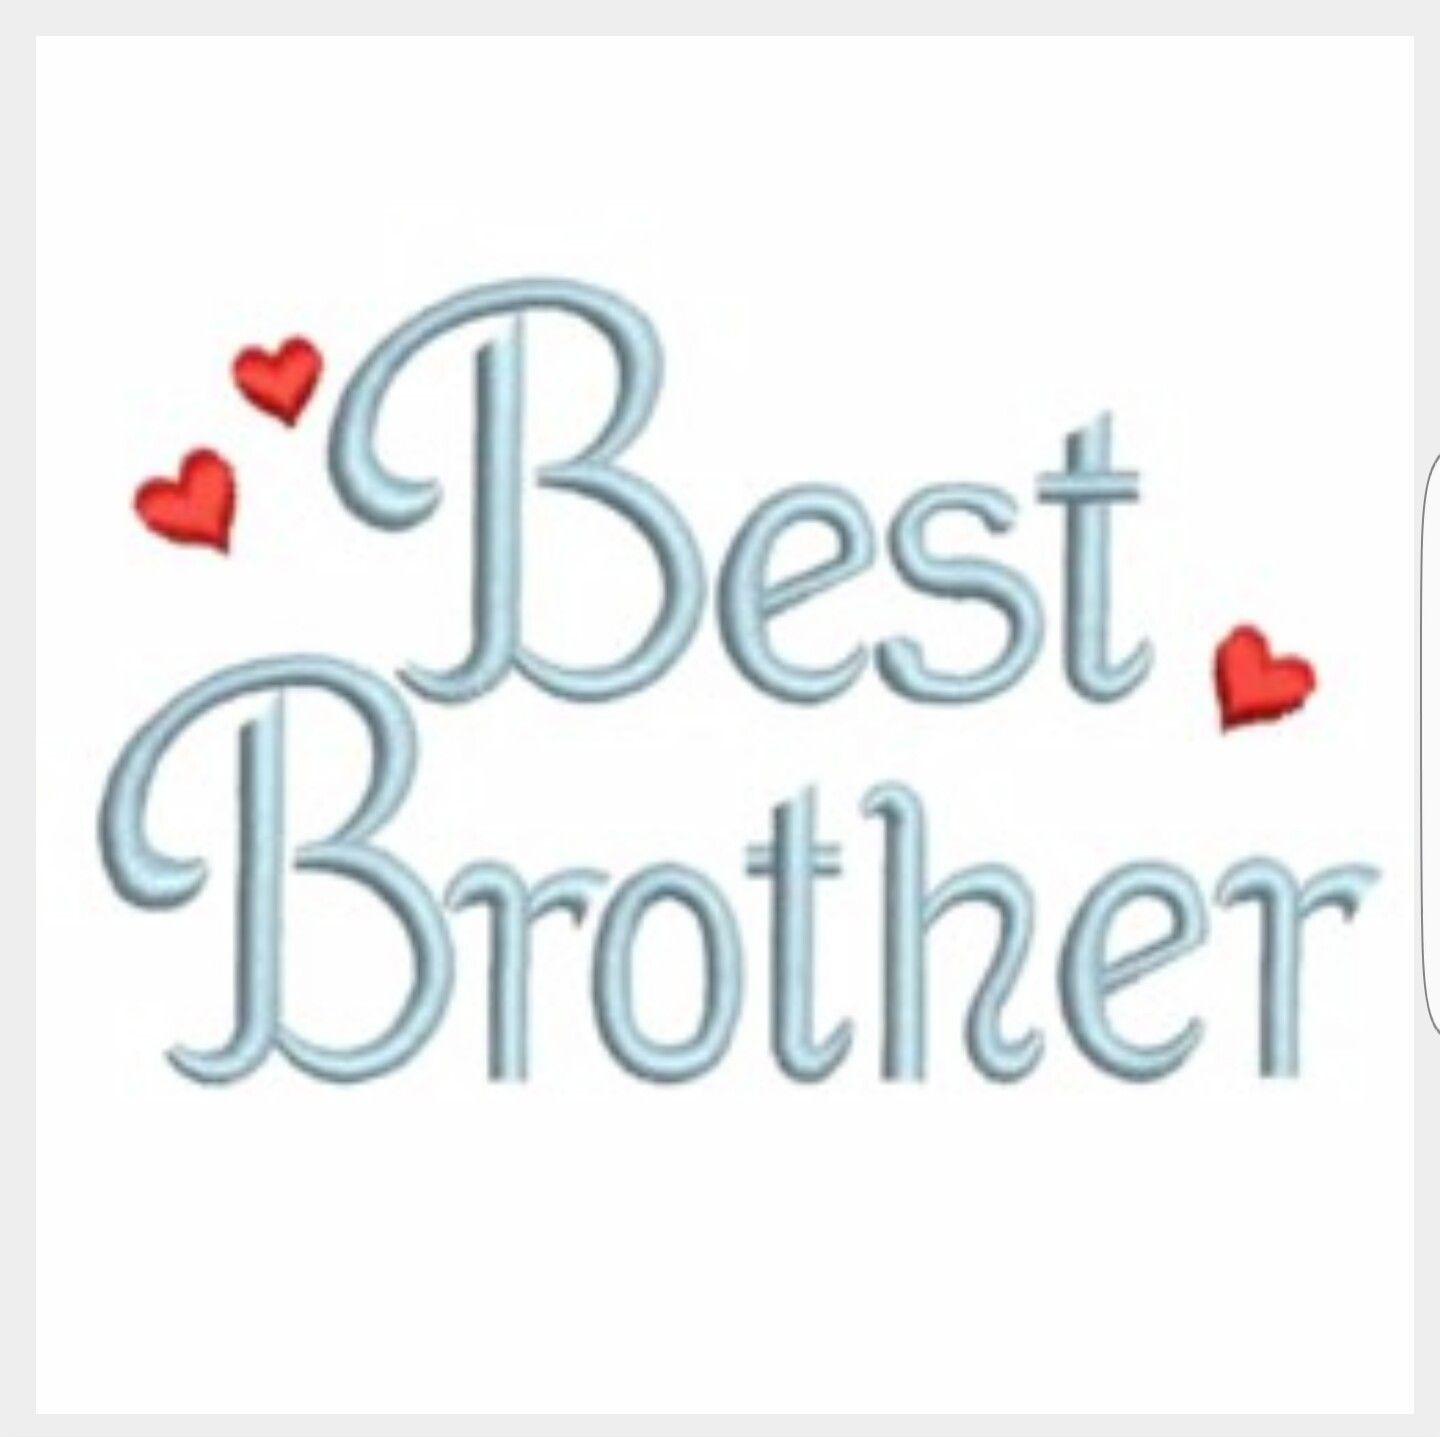 Brother Wallpapers